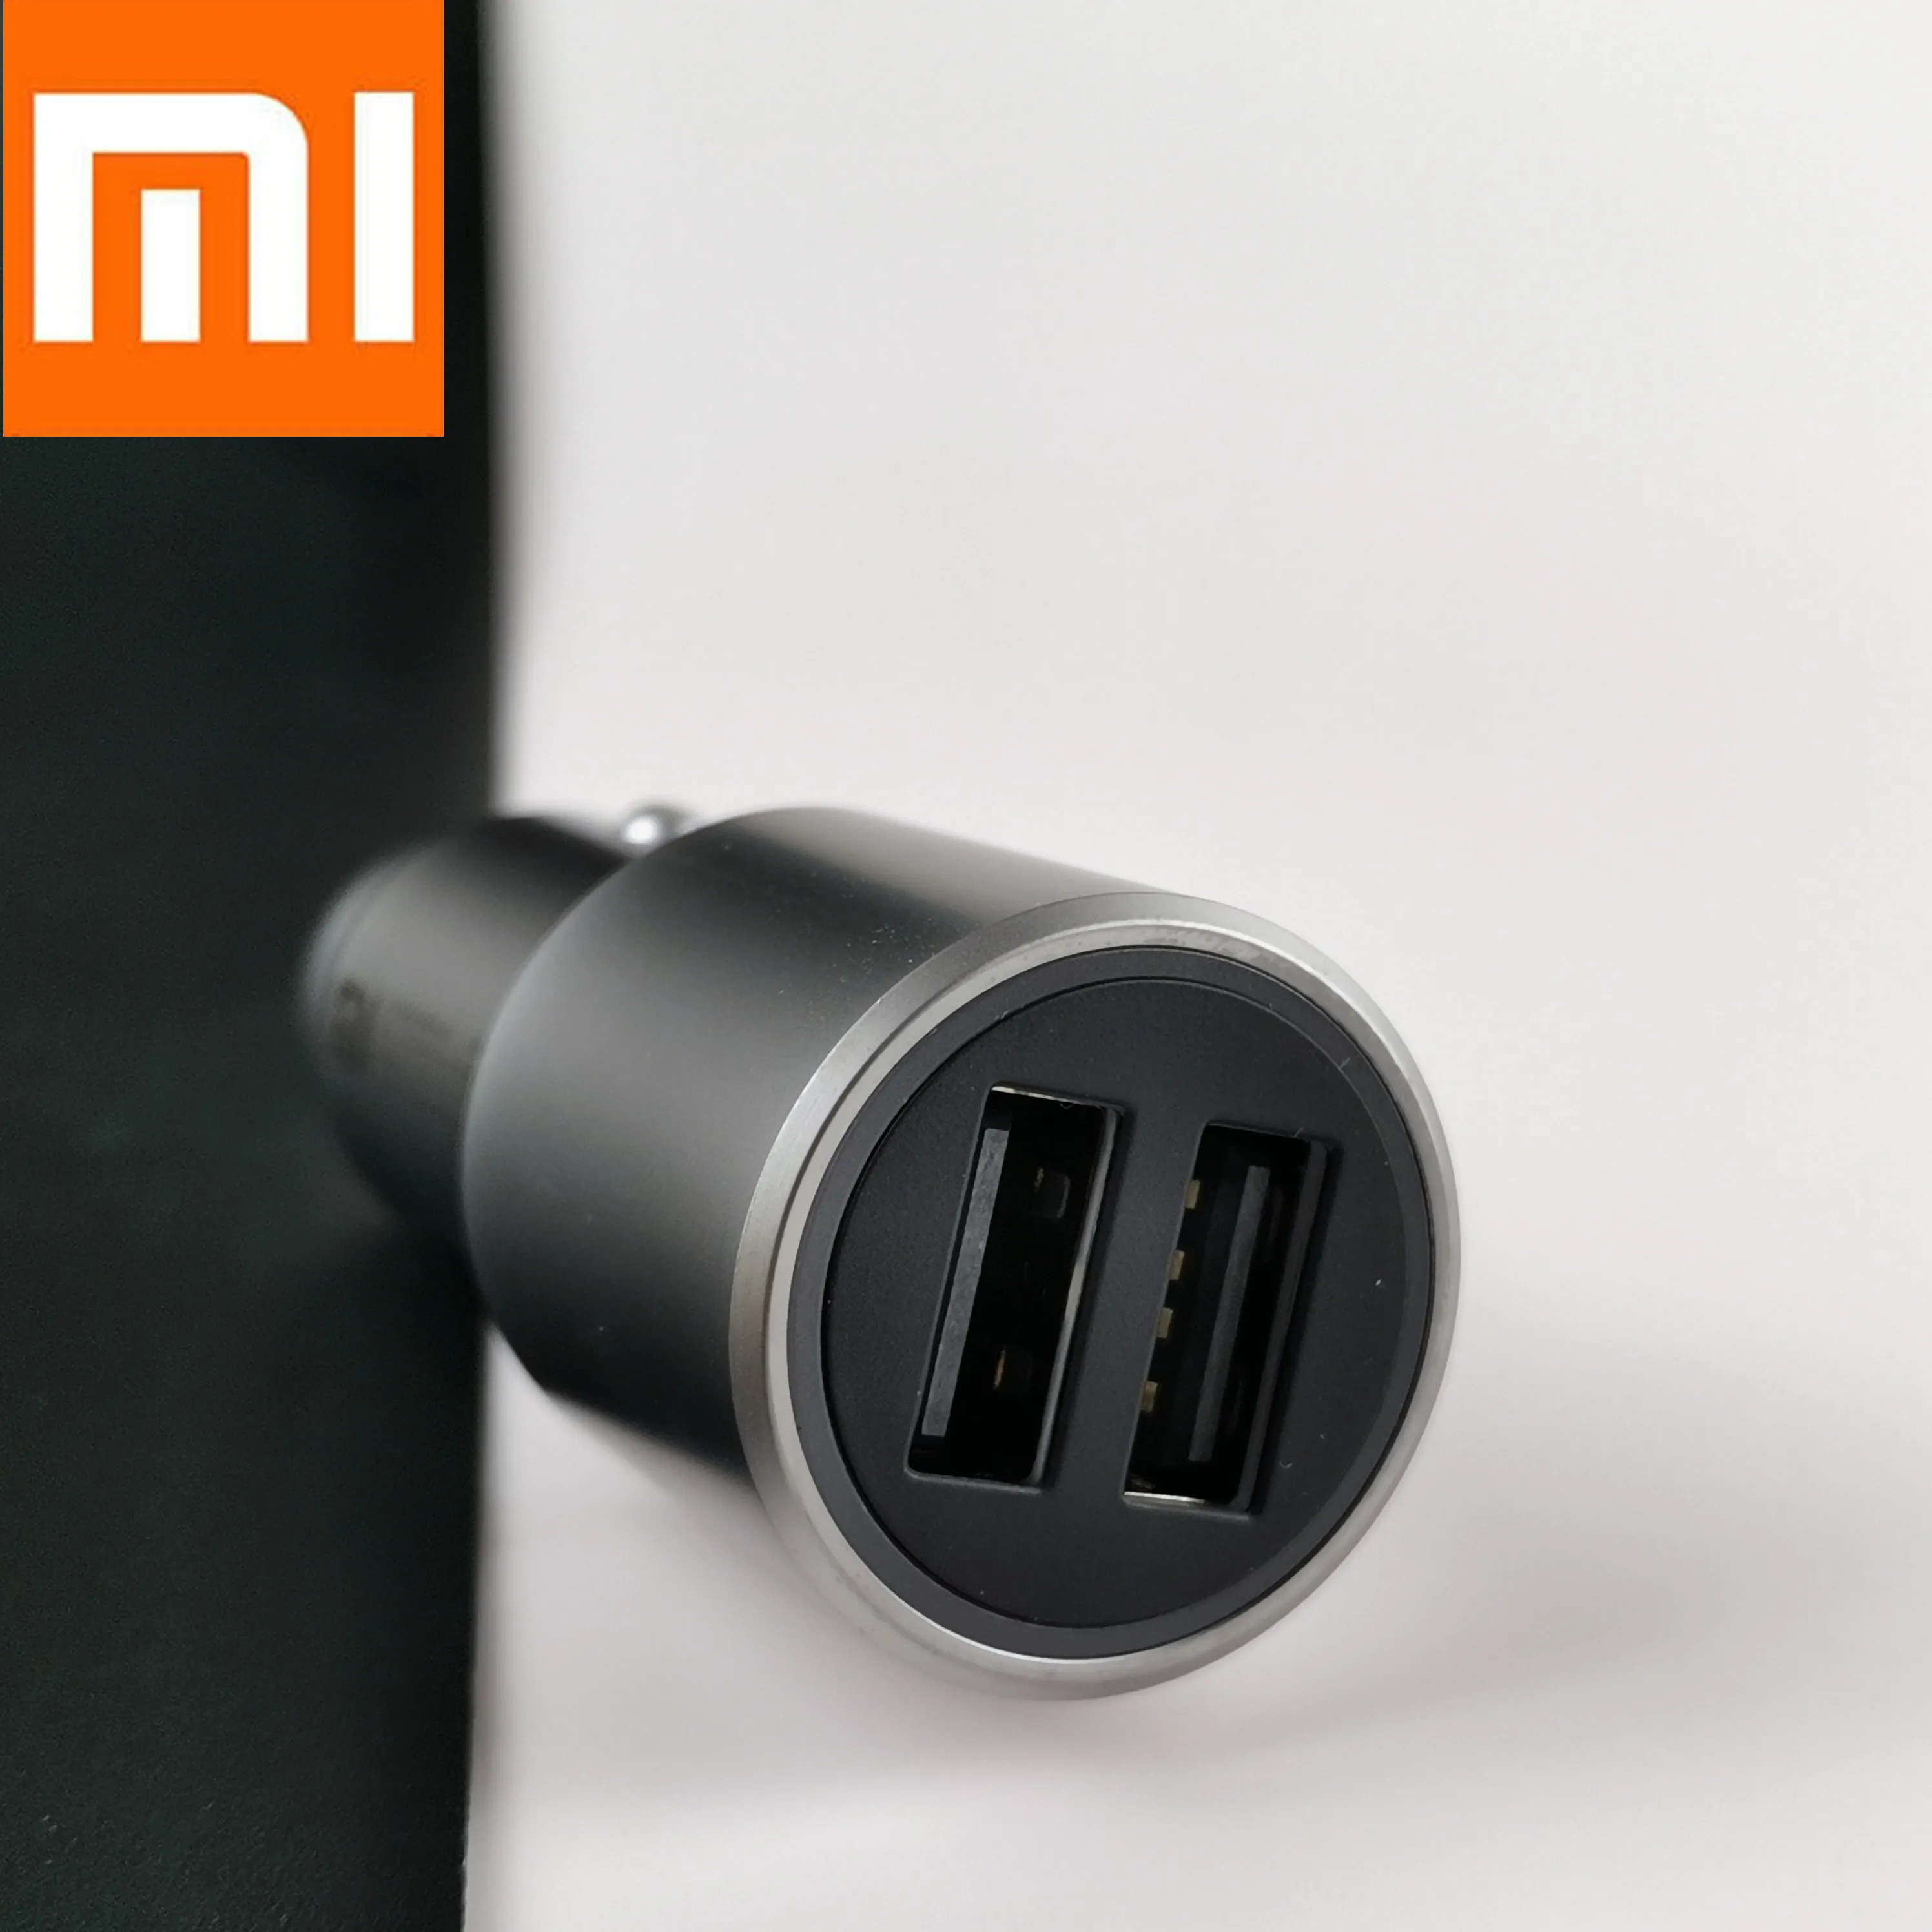 Xiaomi Car Charger QC 3.0 Original 18w Fast Charge Dual USB Port Chargers 5V/3A 9V/2A 12V/1.5A For Xiaomi Mobile Phone apple watch and phone charger